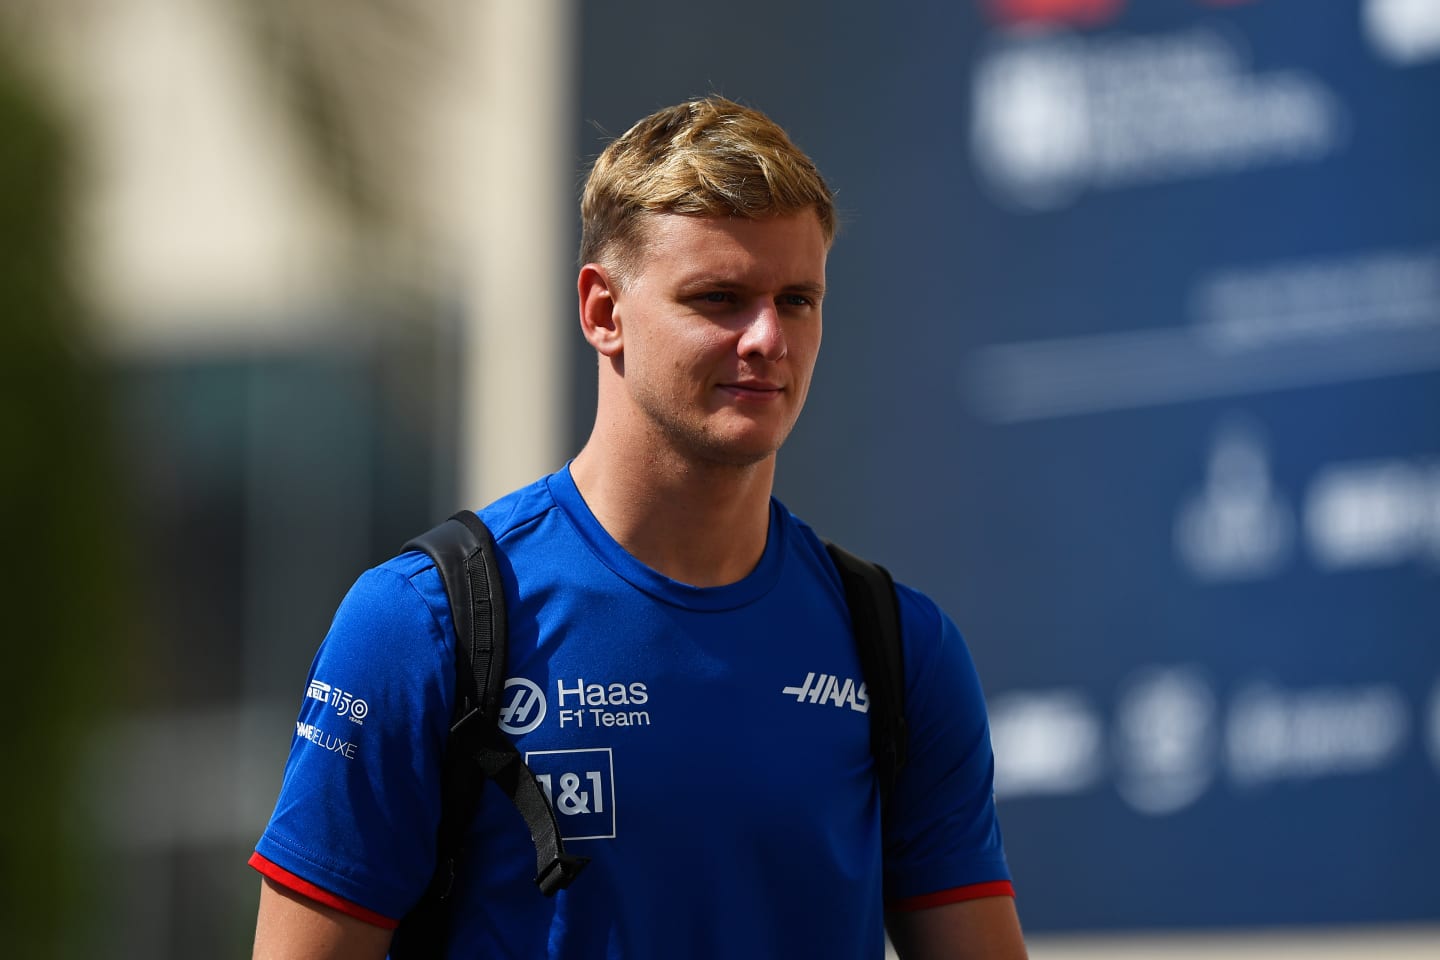 ABU DHABI, UNITED ARAB EMIRATES - NOVEMBER 19: Mick Schumacher of Germany and Haas F1 walks in the paddock during final practice ahead of the F1 Grand Prix of Abu Dhabi at Yas Marina Circuit on November 19, 2022 in Abu Dhabi, United Arab Emirates. (Photo by Rudy Carezzevoli/Getty Images)